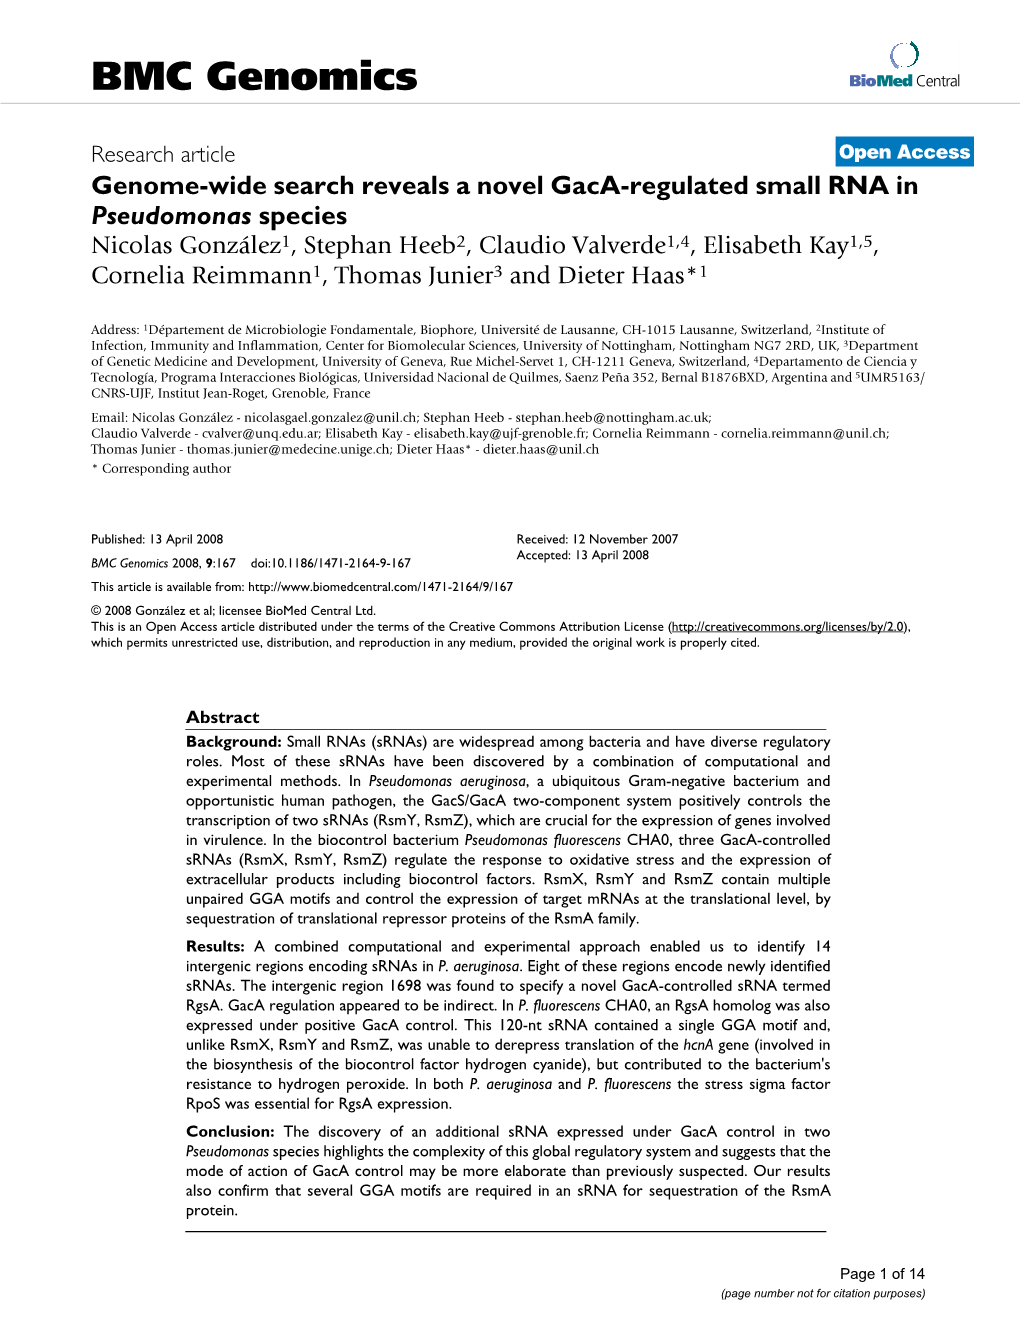 Genome-Wide Search Reveals a Novel Gaca-Regulated Small RNA In